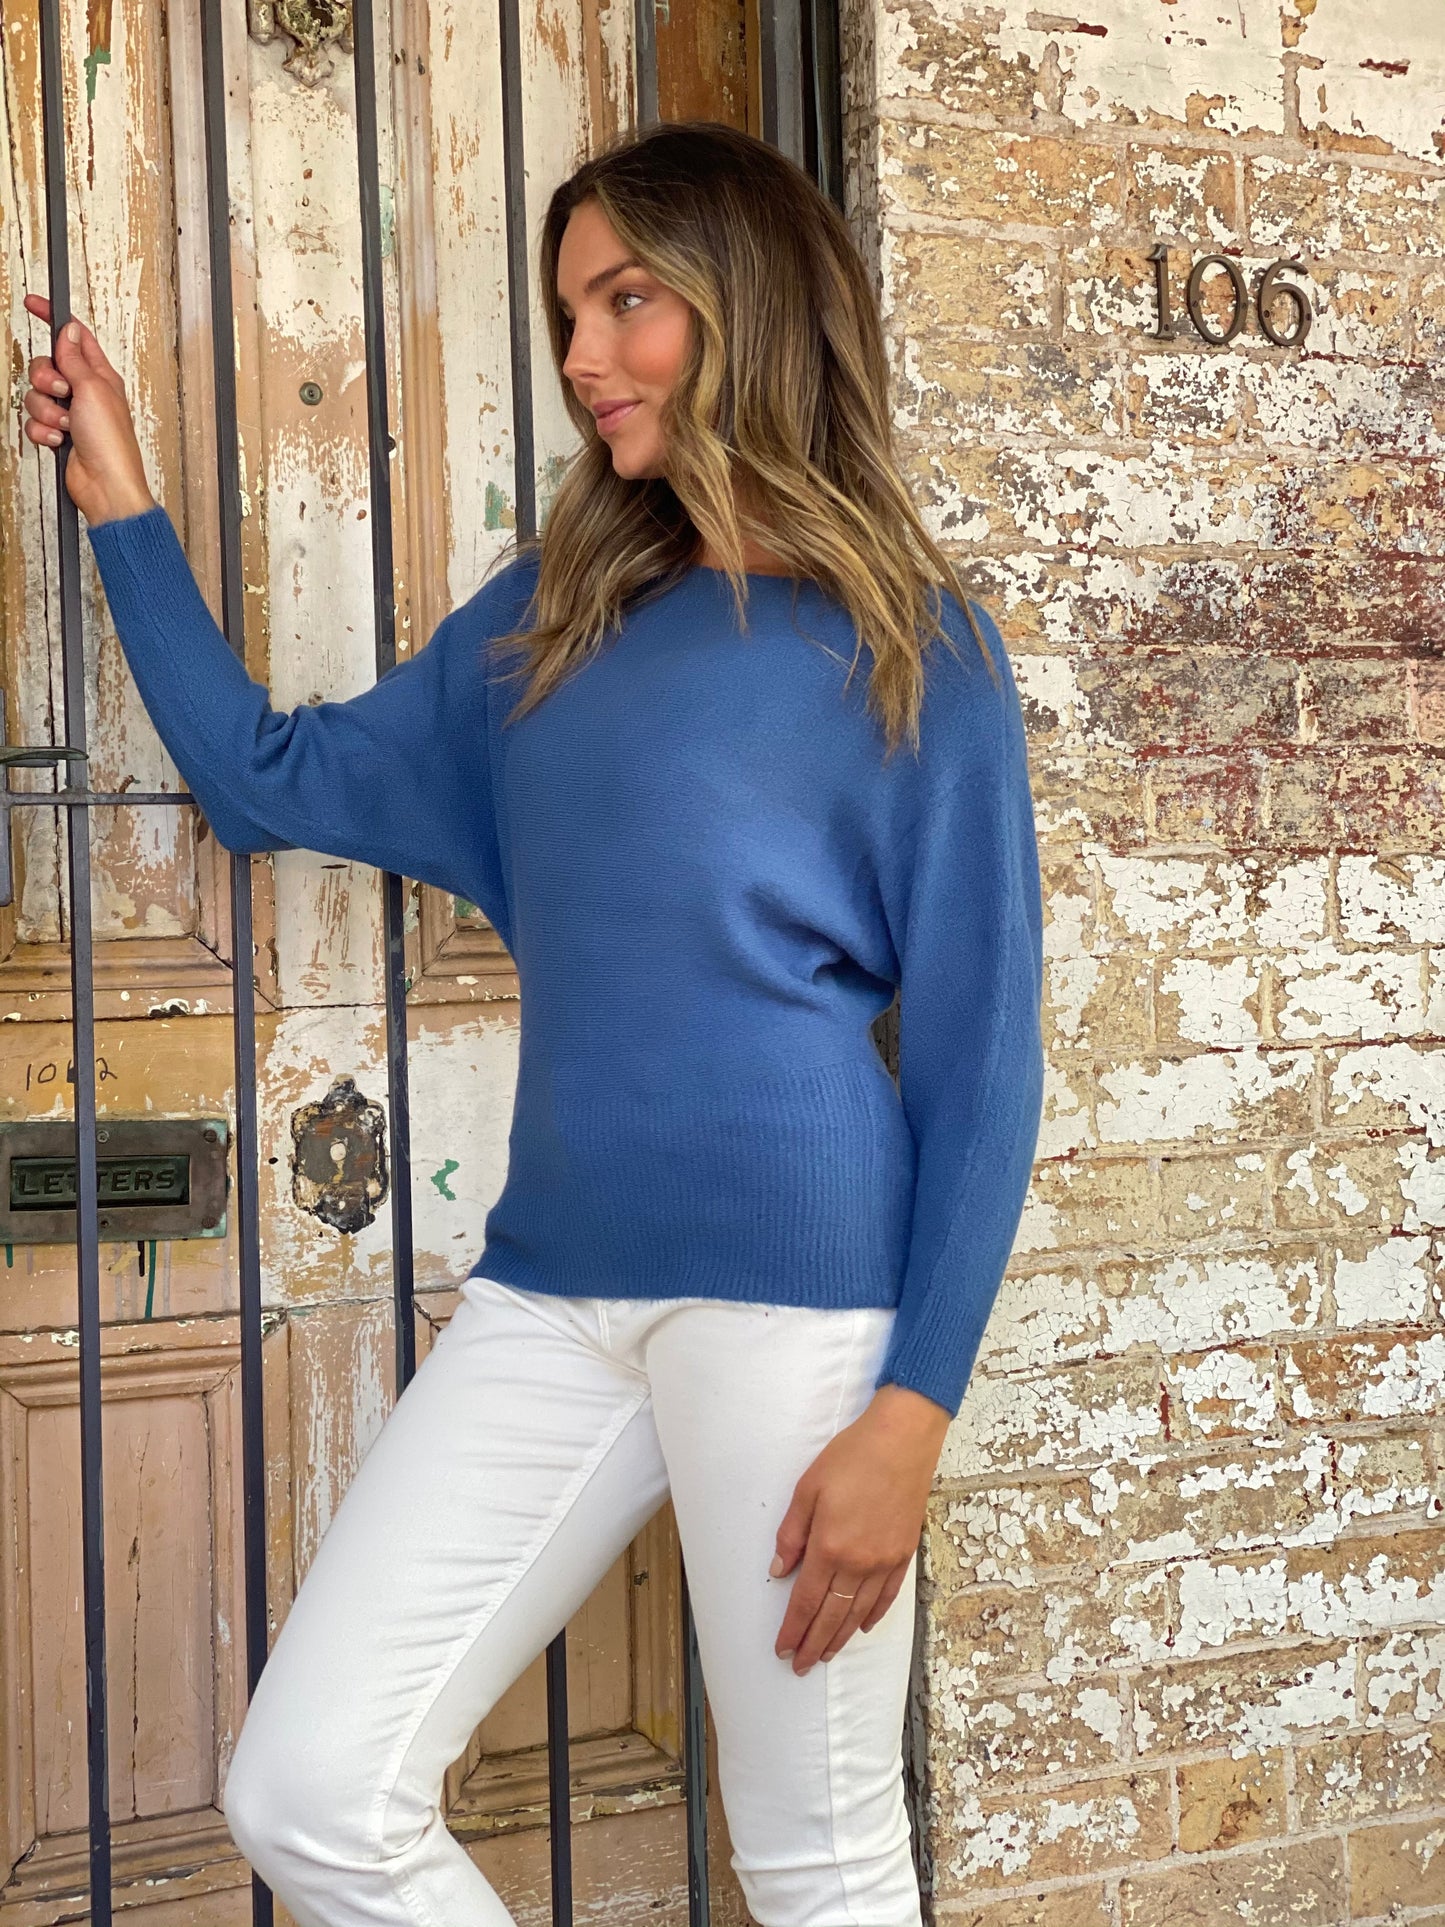 LY262B  Knit jumper (Pack) on sale $10